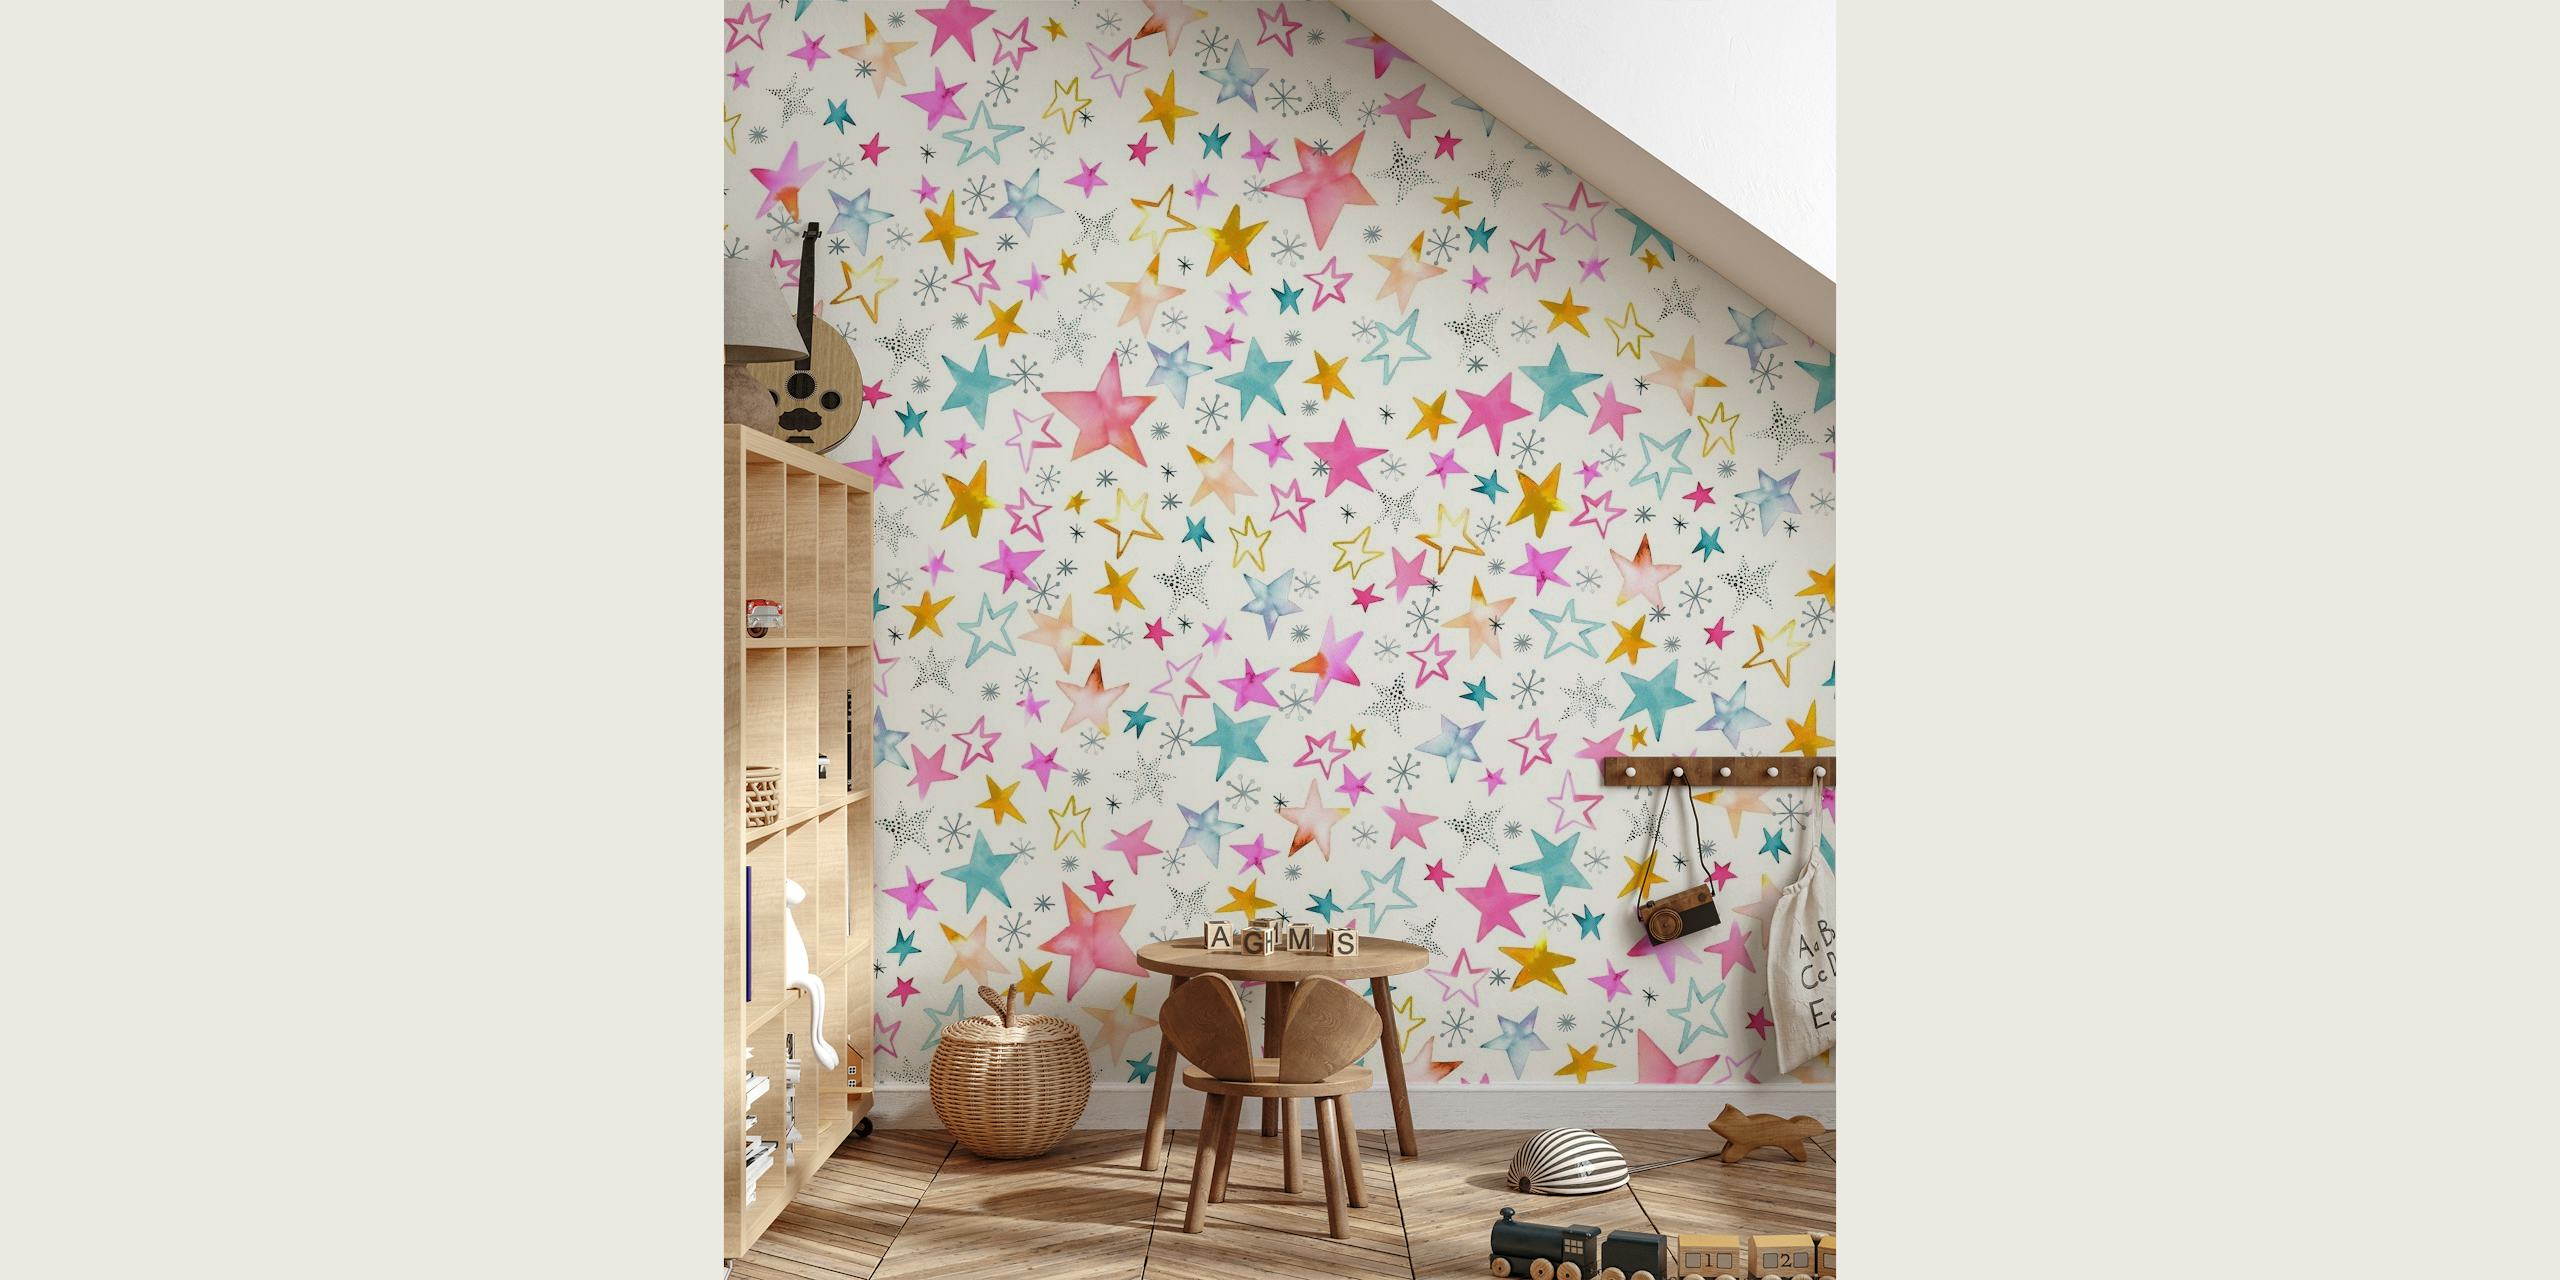 Soft pink, white, and multi-colored stars pattern wall mural